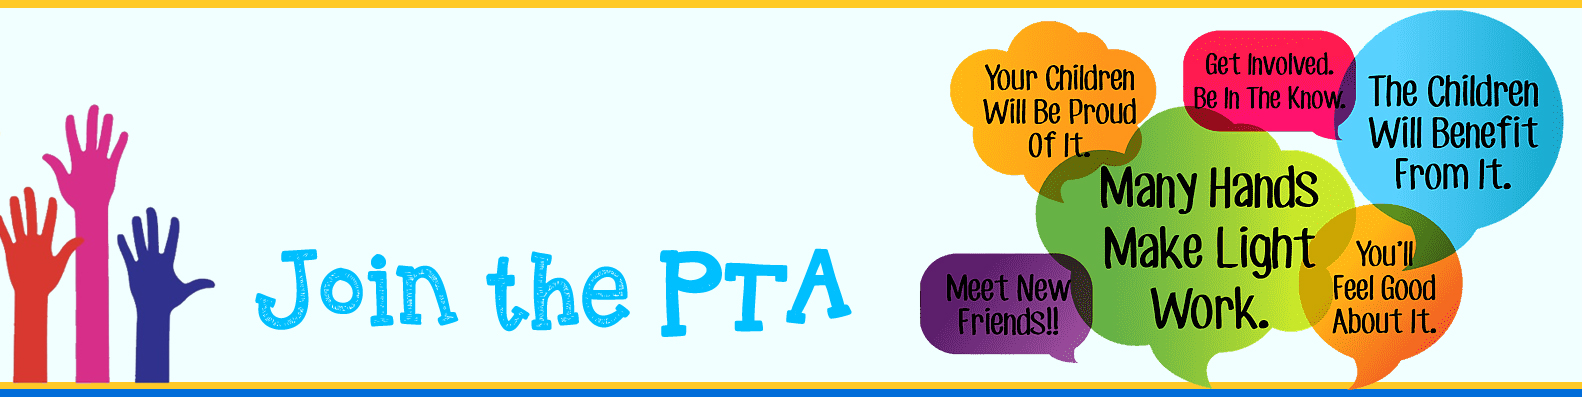 a graphic that say Join the PTA - Your children will be proud of it, get involved be in the know- the Children will benefit from it, many hands make light work, you'll feel good about it, meet new friends